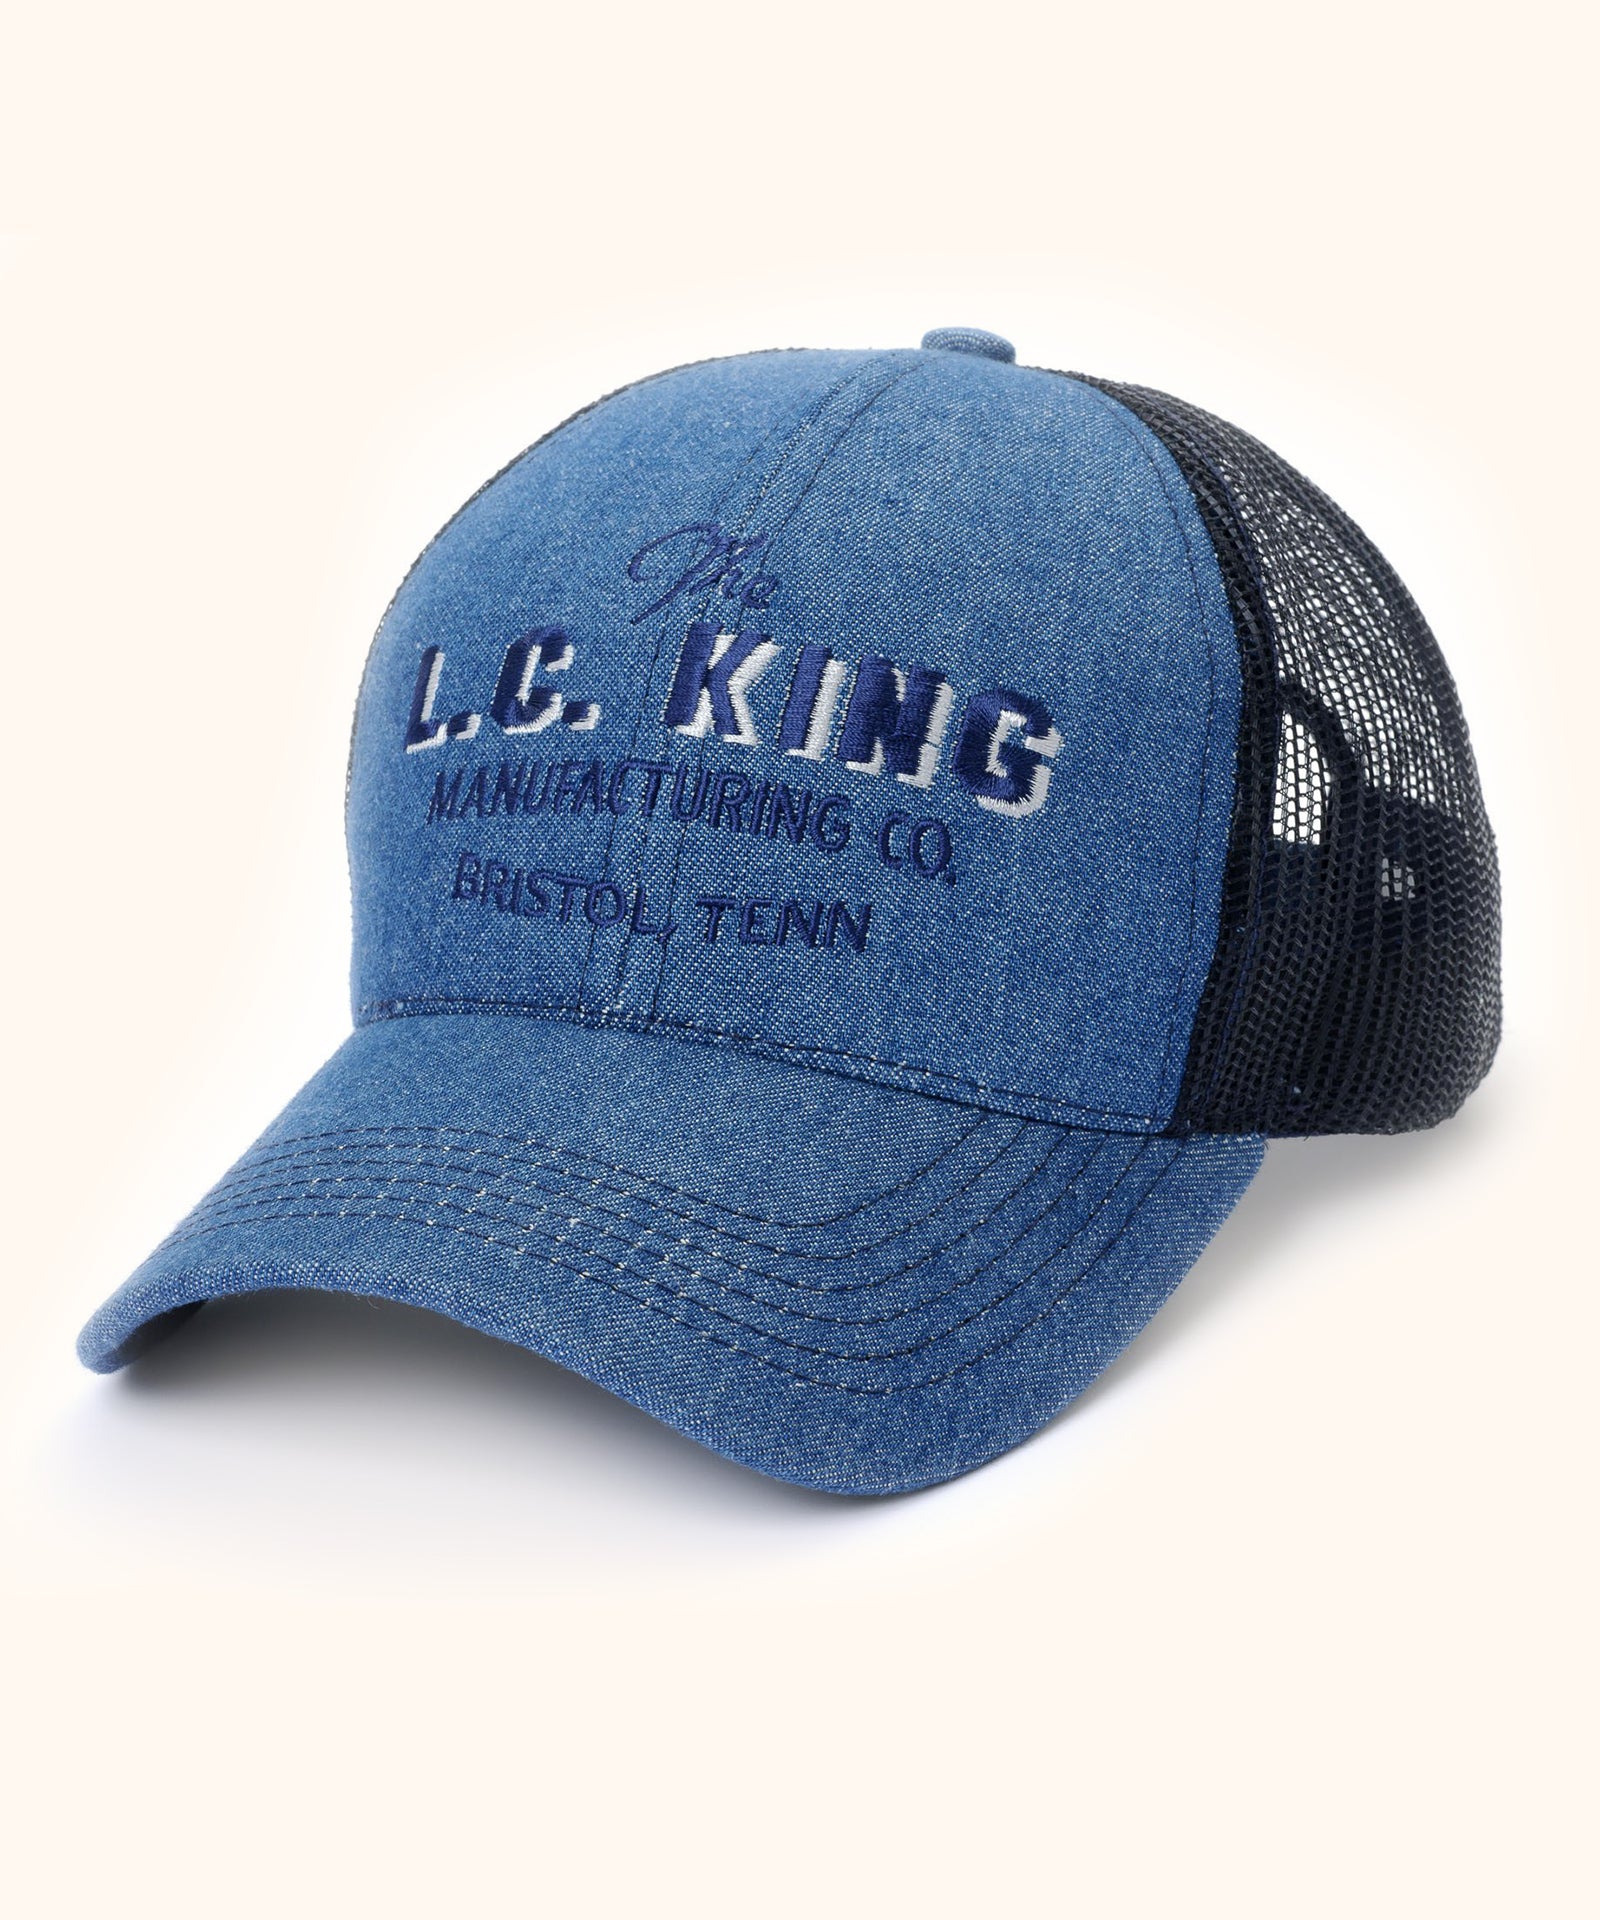 LC King Cap with Mesh Back – LC King Mfg